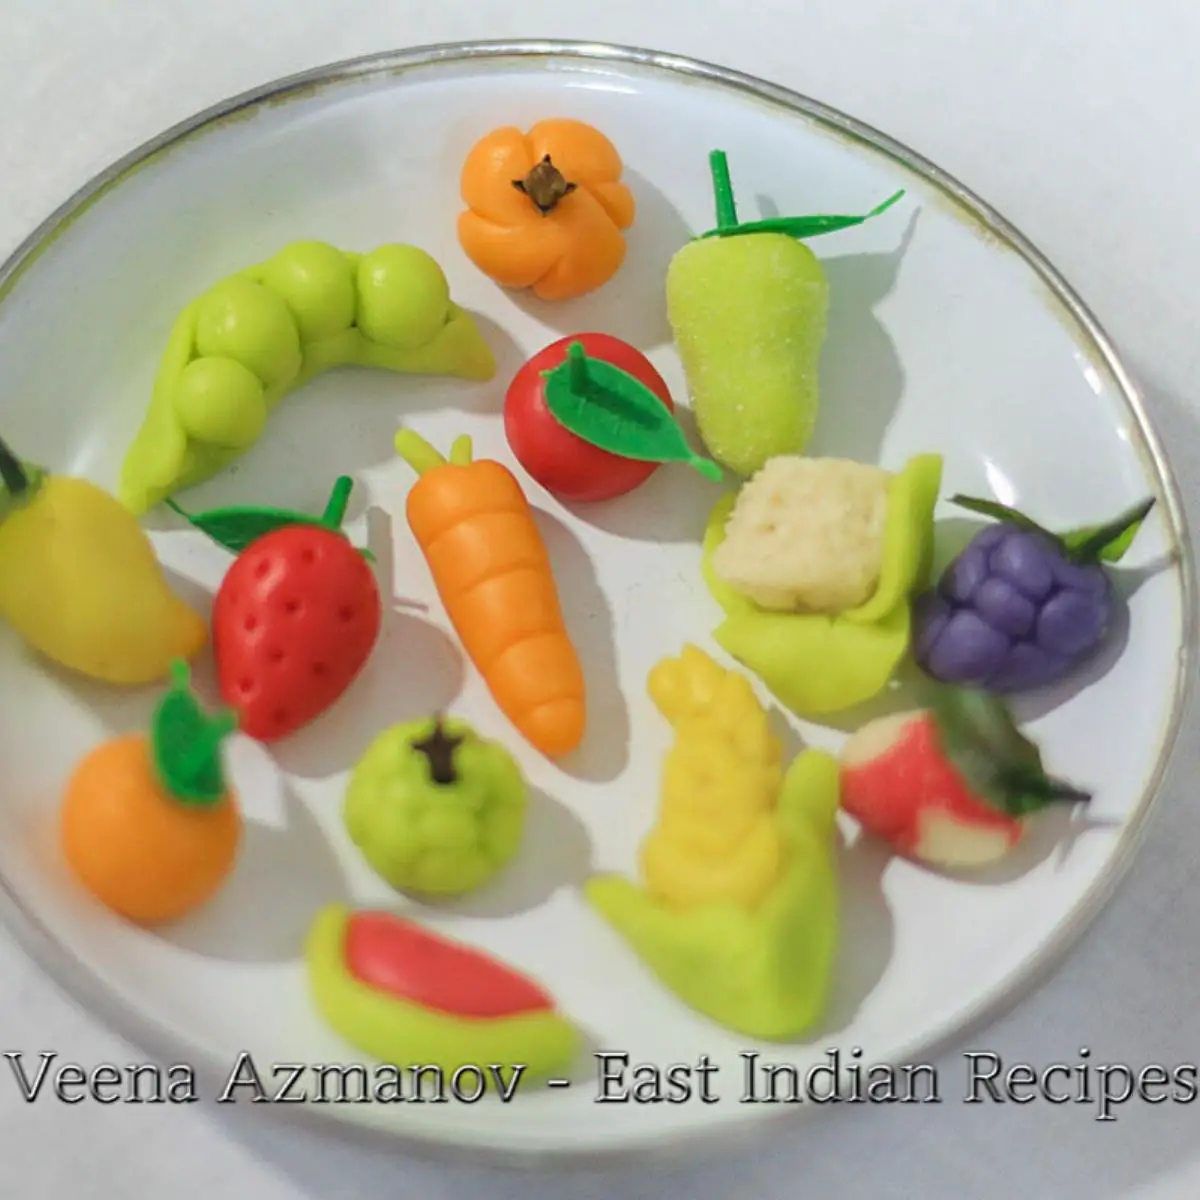 Marzipan fruits in a white plate.